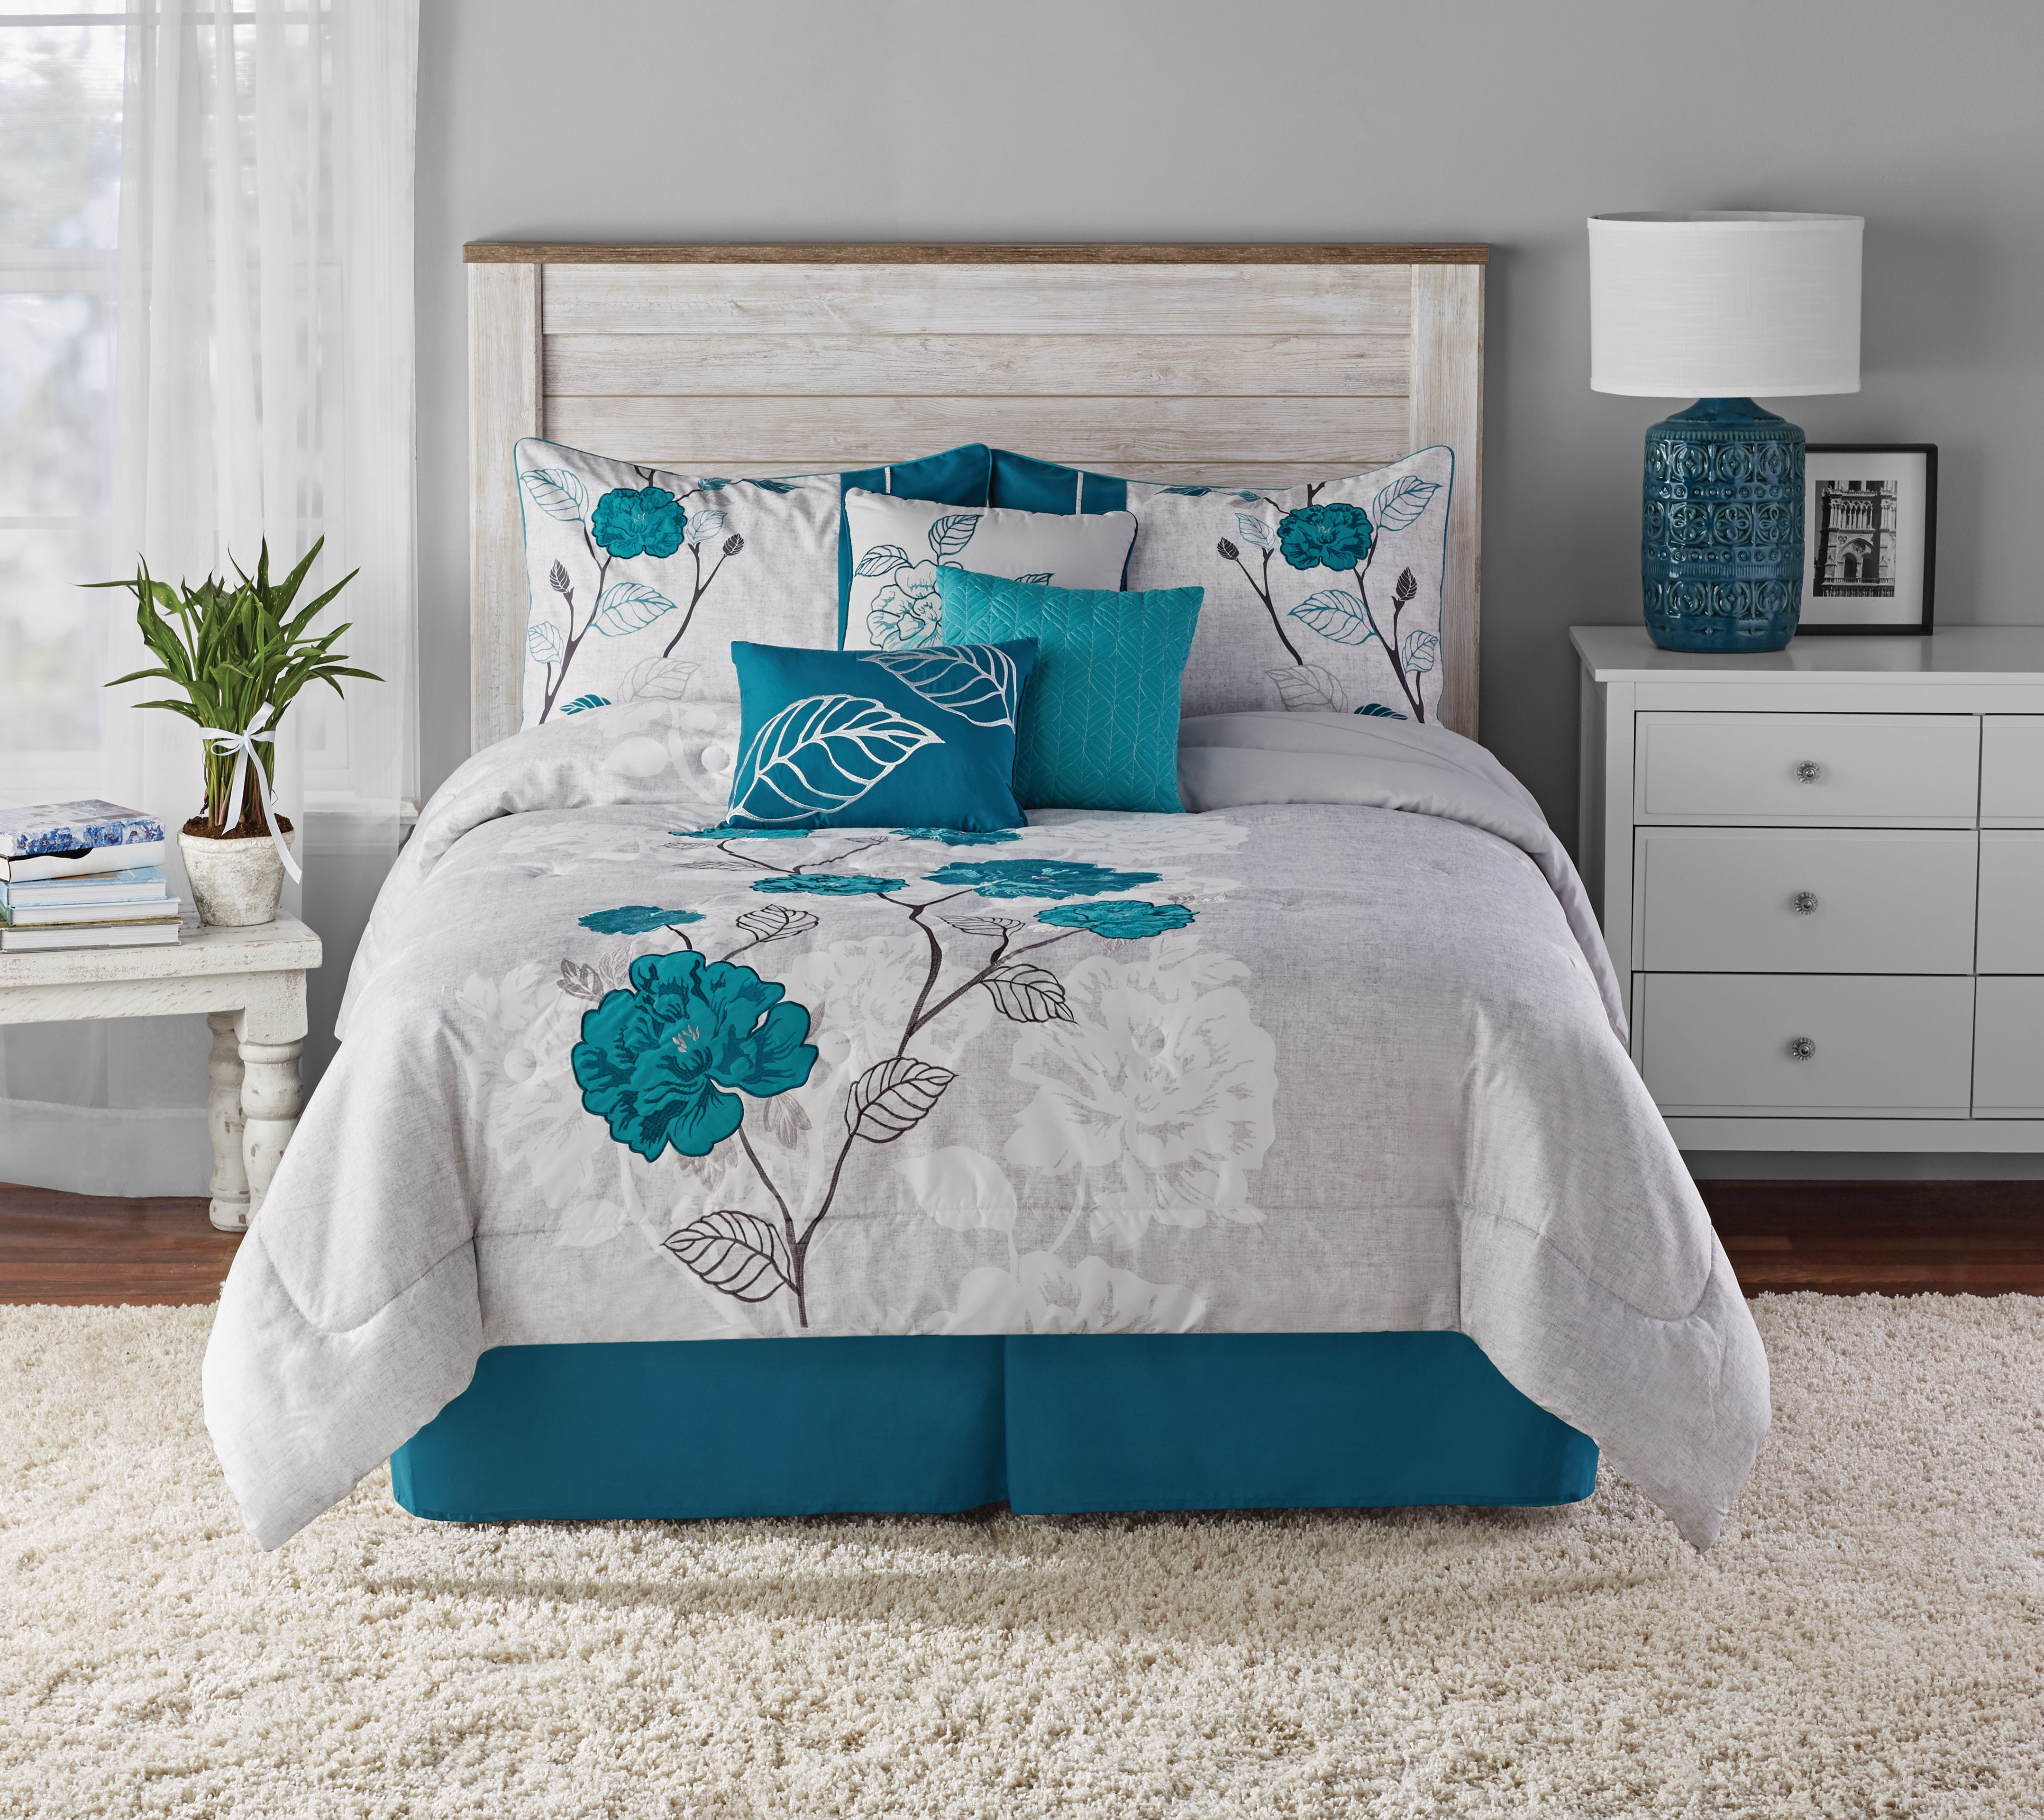 Mainstays 7-Piece Teal Roses Comforter Set, Full/Queen, With Embroidered Applique Detail